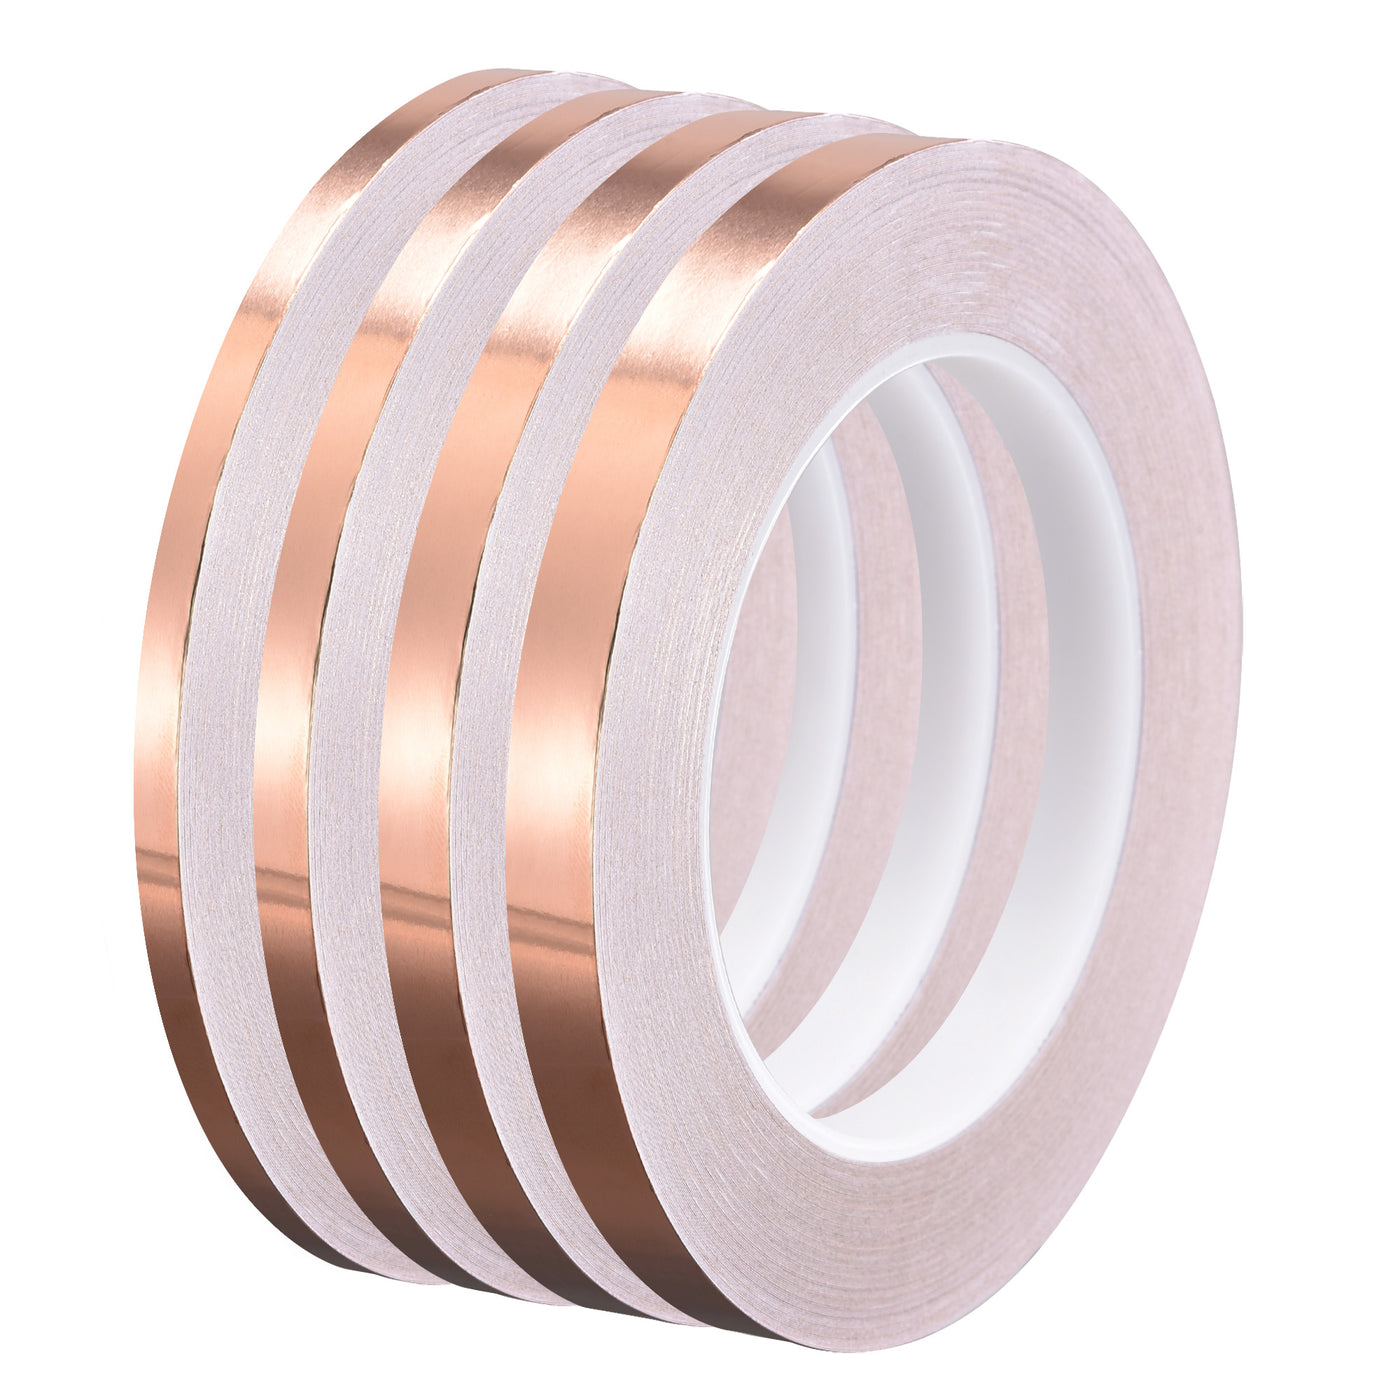 uxcell Uxcell Single-Sided Conductive Tape Copper Foil Tape 5mm/6mm/8mm/10mm x 30m/98.4ft 4pcs